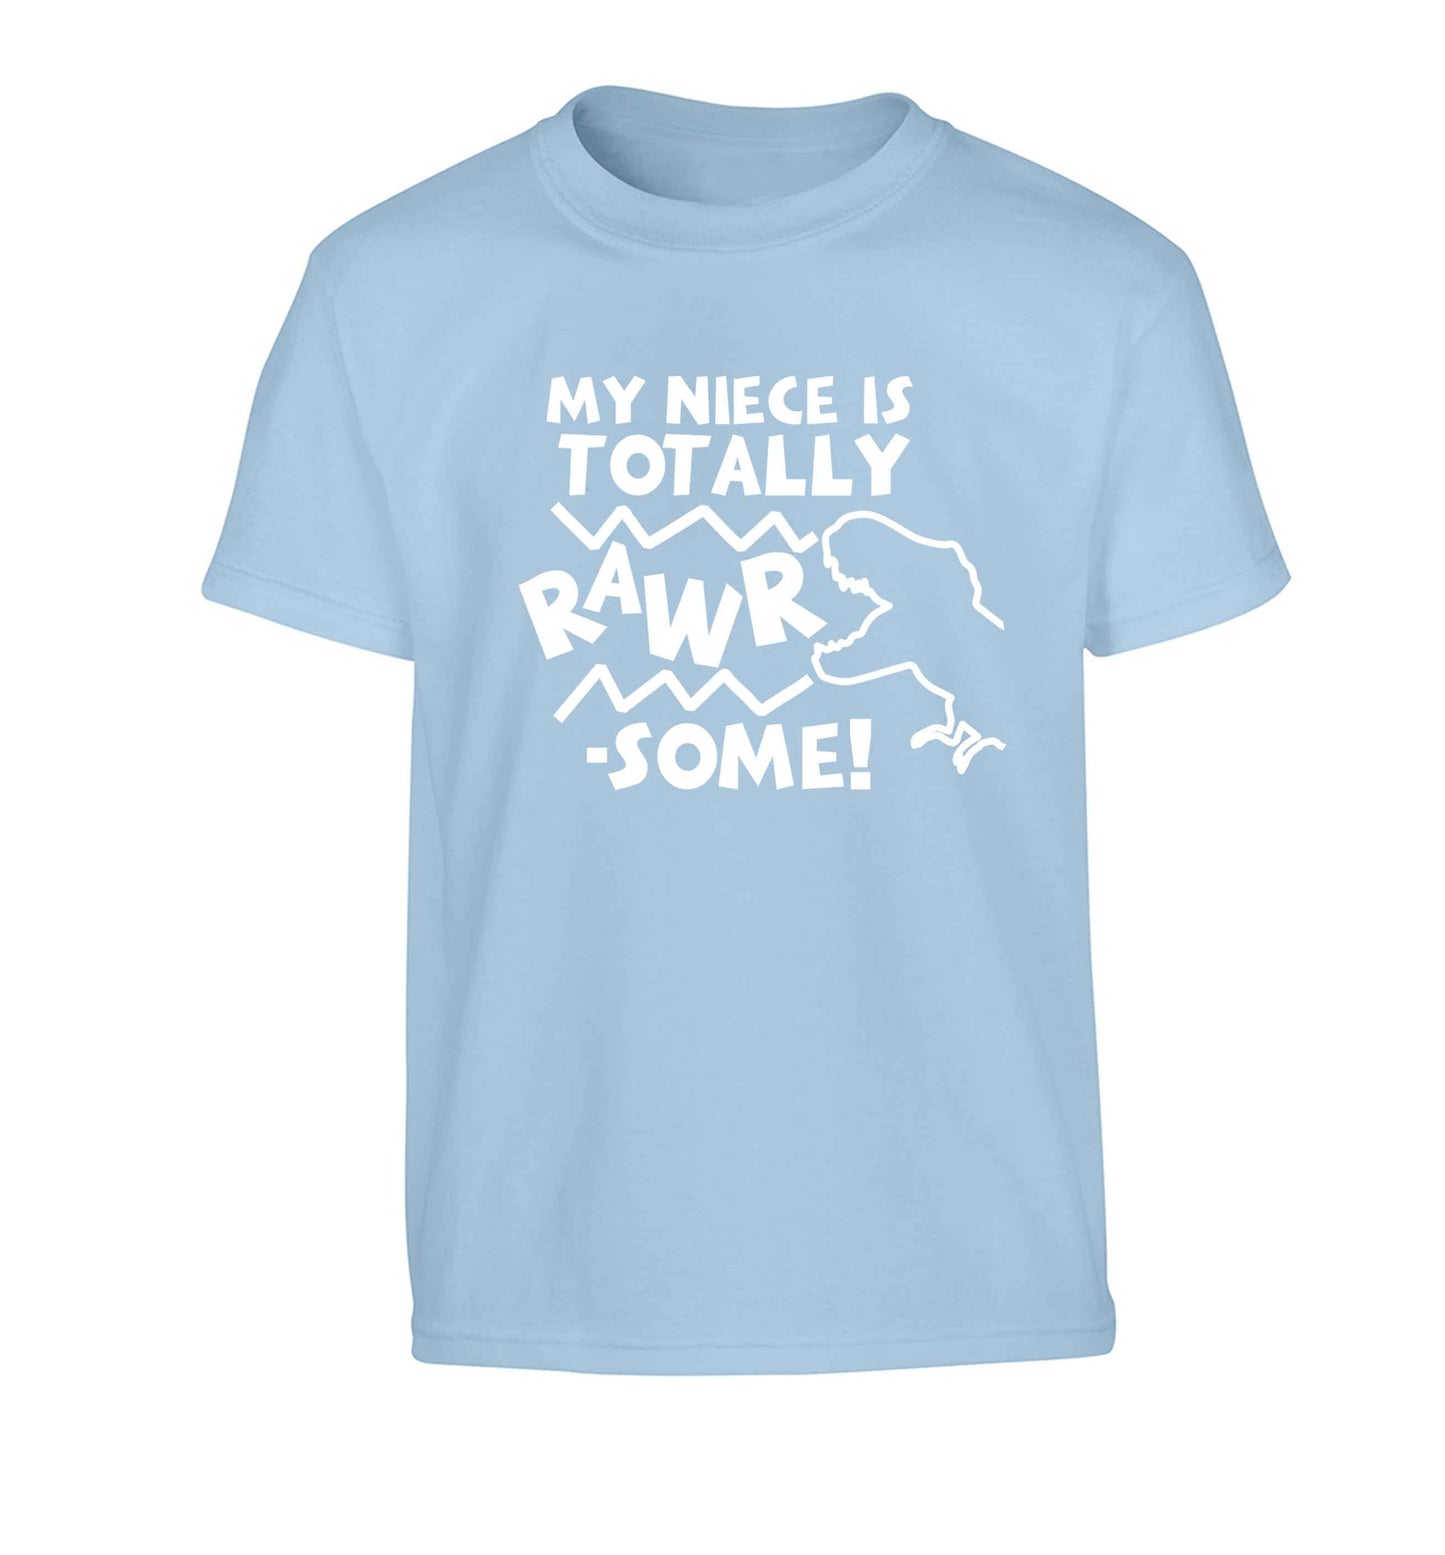 My niece is totally rawrsome Children's light blue Tshirt 12-13 Years